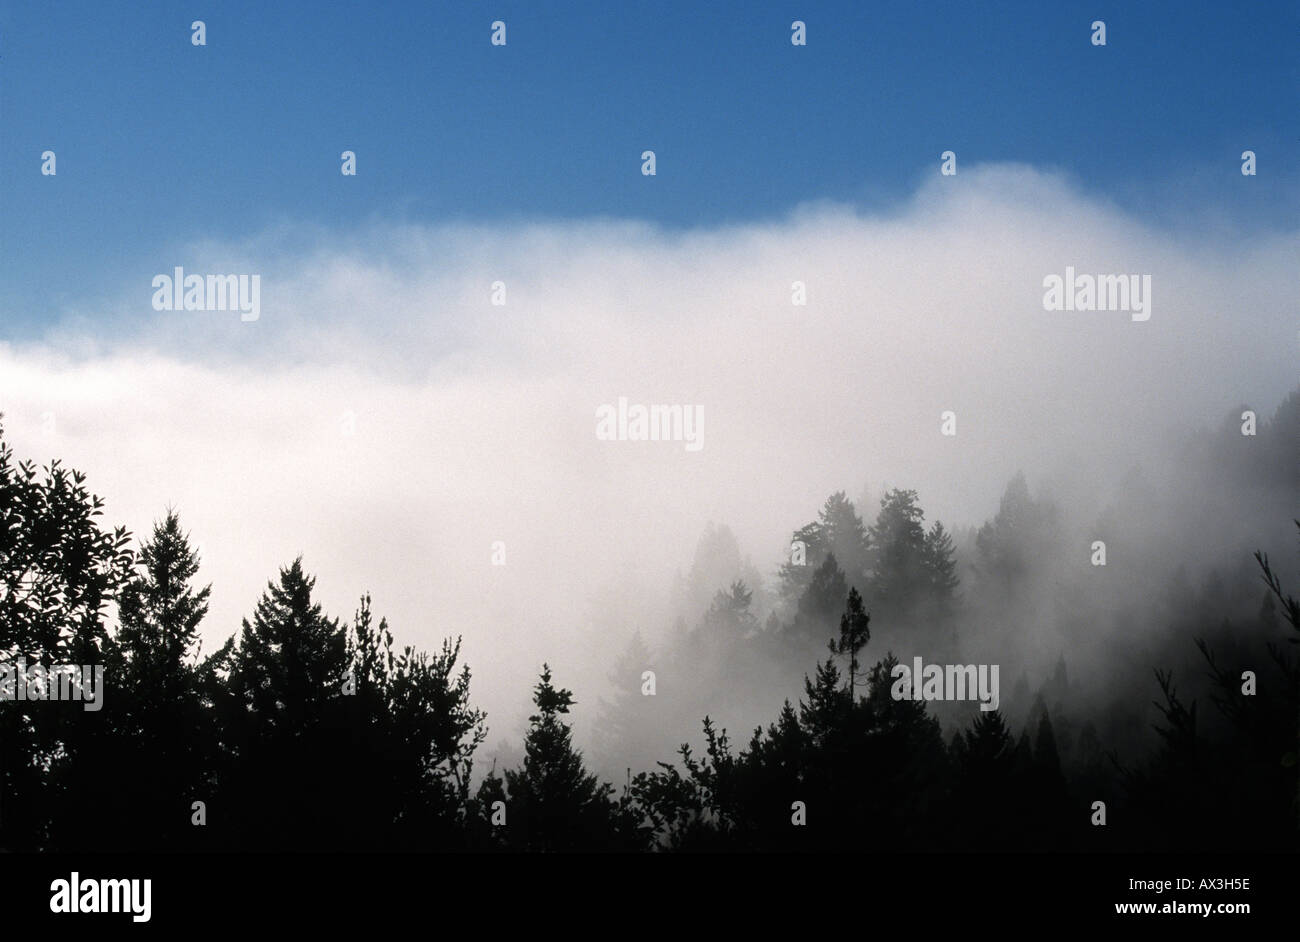 fog with redwoods and fir trees in foreground, near Santa Cruz, Ben Lomond, CA Stock Photo